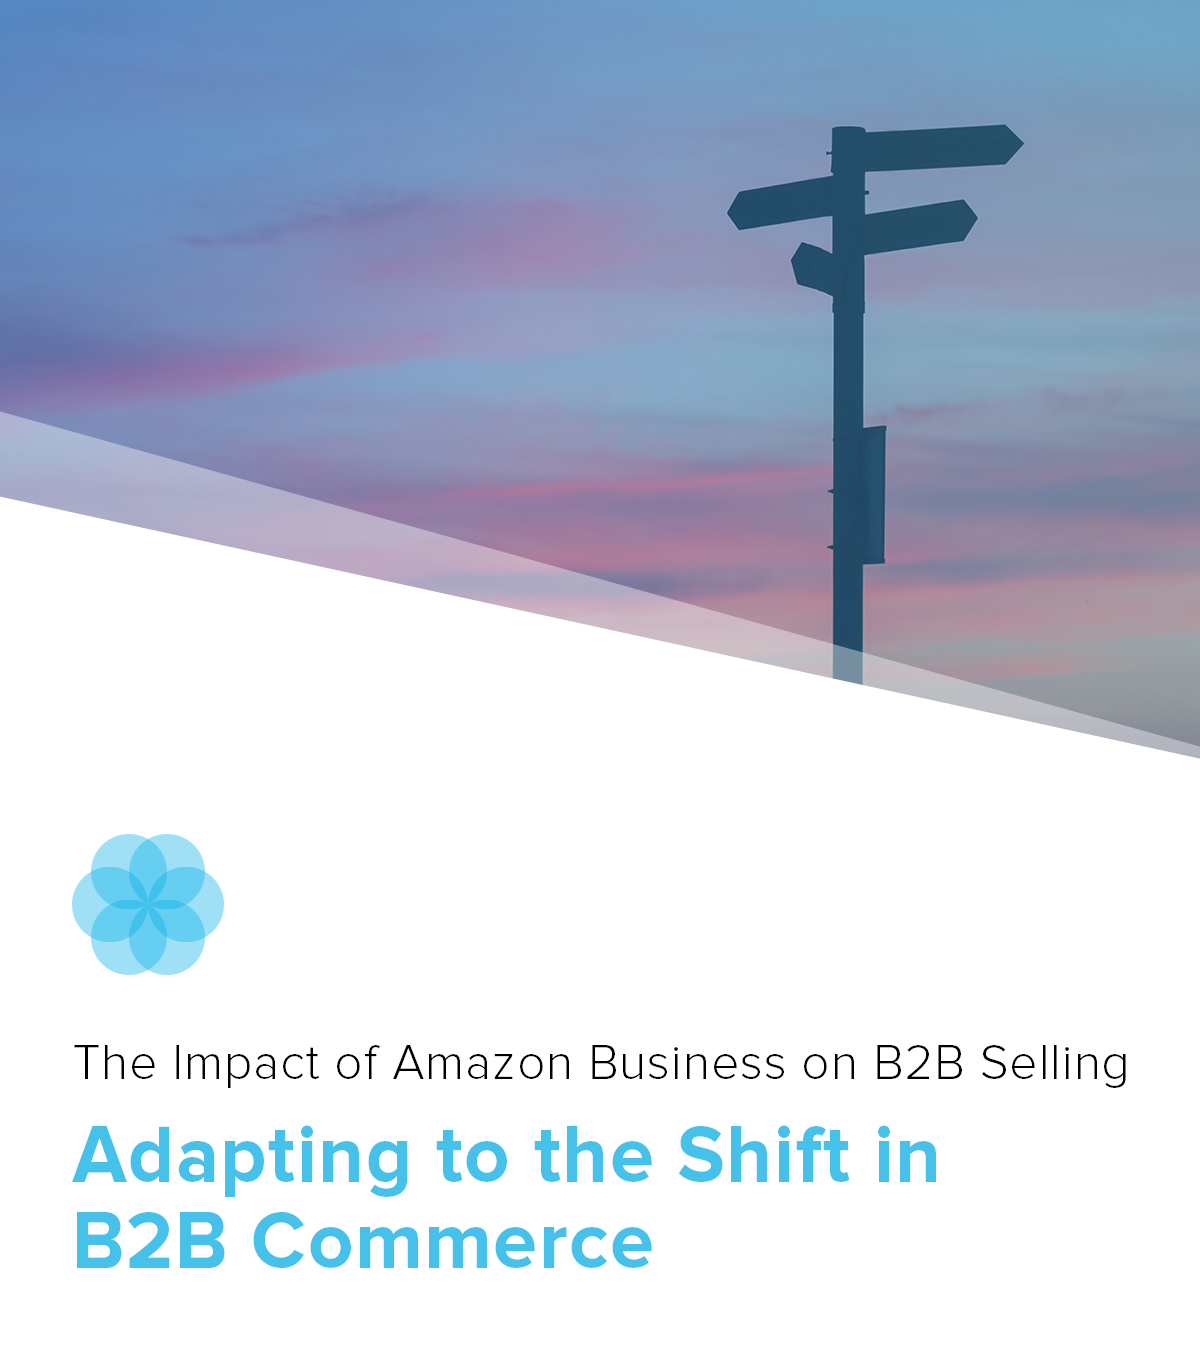 The Impact of Amazon Business on B2B Selling